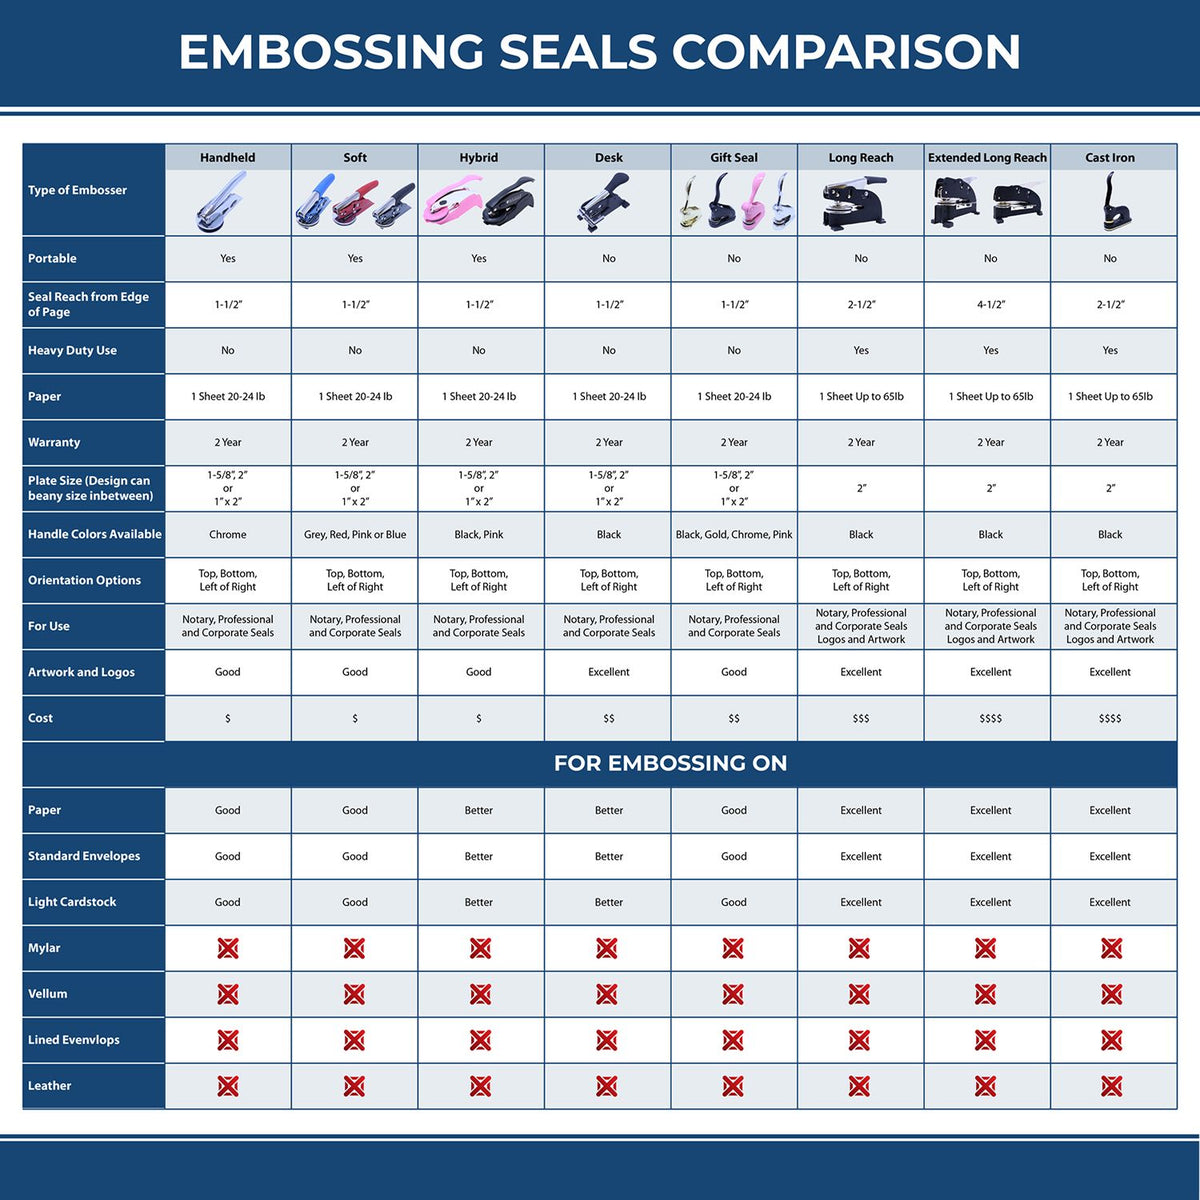 A comparison chart for the different types of mount models available for the Handheld South Dakota Professional Engineer Embosser.